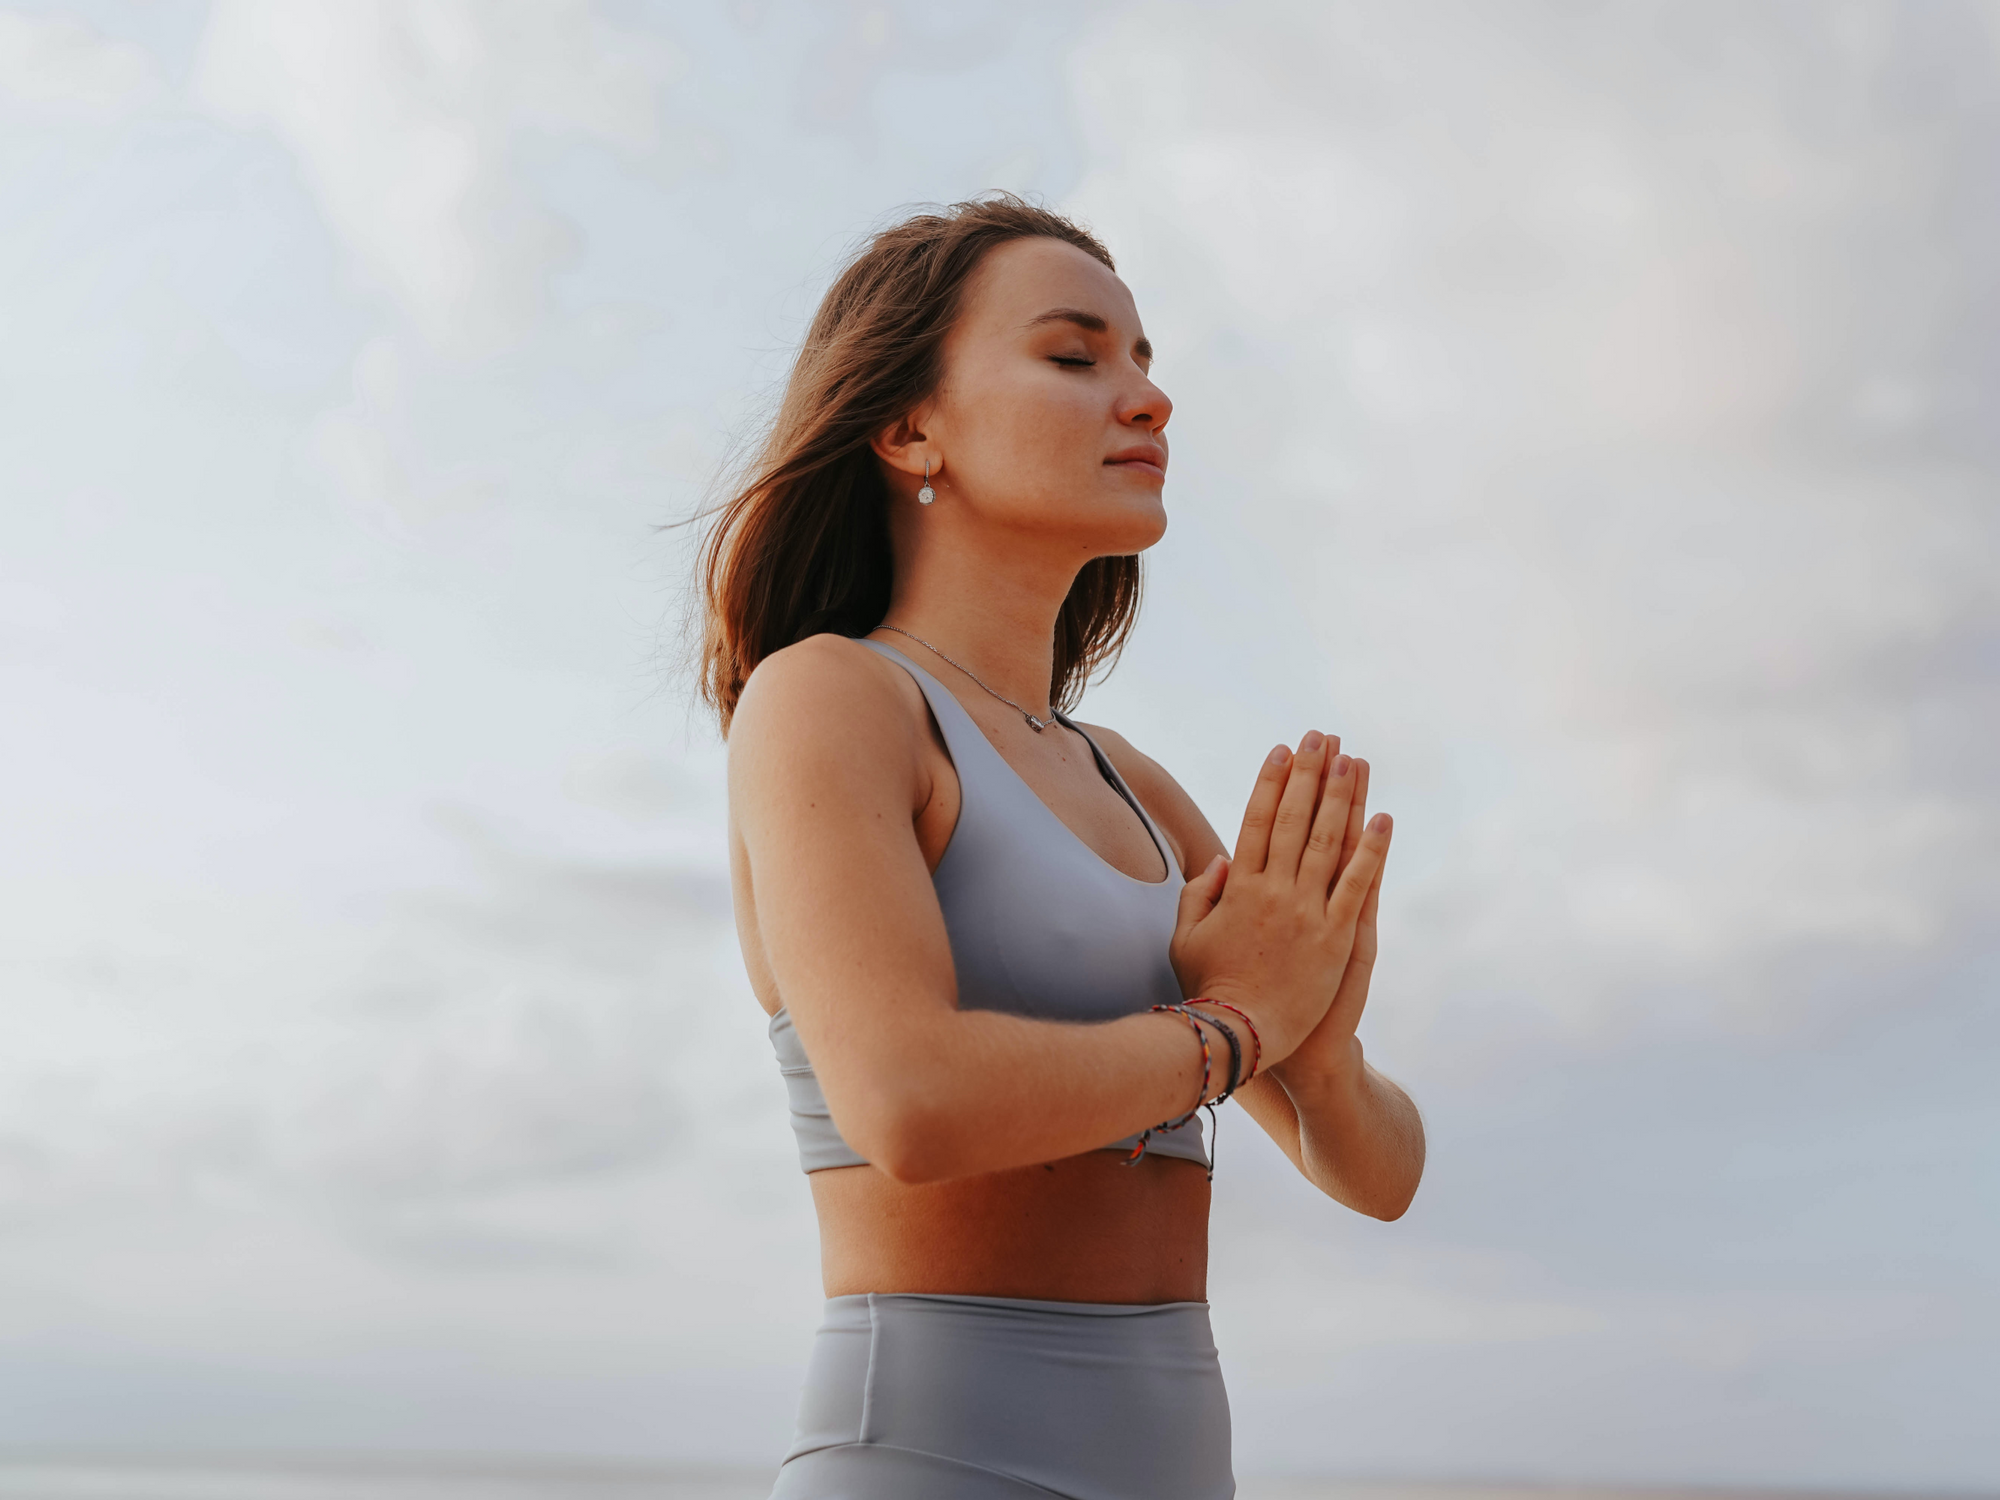 Meditation Practice Improves Inner and Outer Beauty